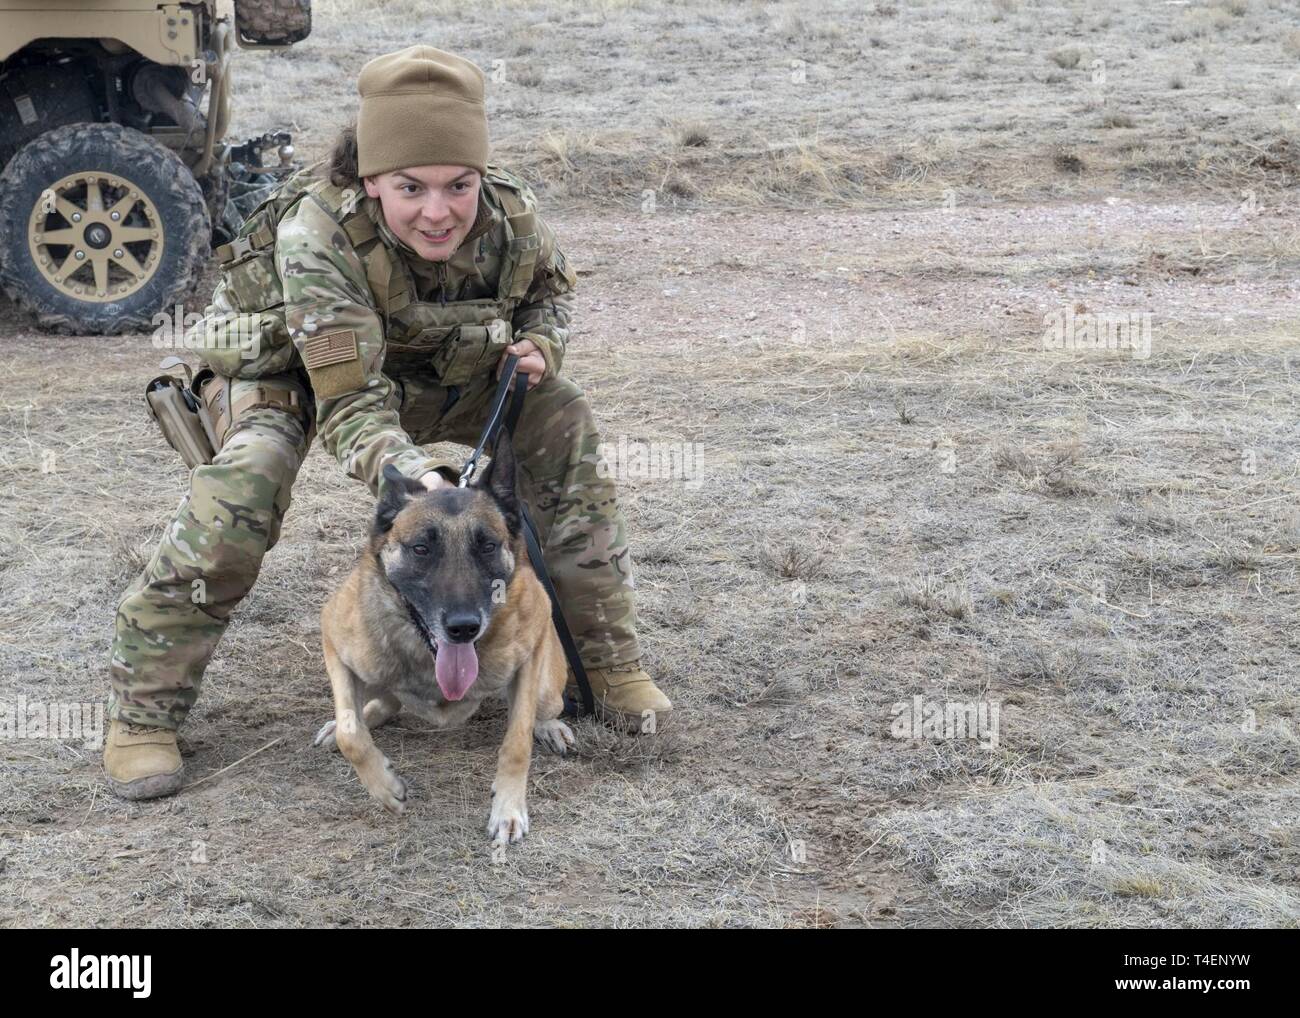 Senior Airman Danielle Barlett, 823d Base Defense Squadron (BDS) military working dog (MWD) handler, excites NNorton, 823d BDS MWD, to deter crowds during the Mission Readiness Exercise (MRX) at Camp Guernsey, Wyo., March 25, 2019. Airmen from the 823d BDS learned how to defend a base during a riot or protest and how to use the MWDs as deterrents to civilians. Stock Photo